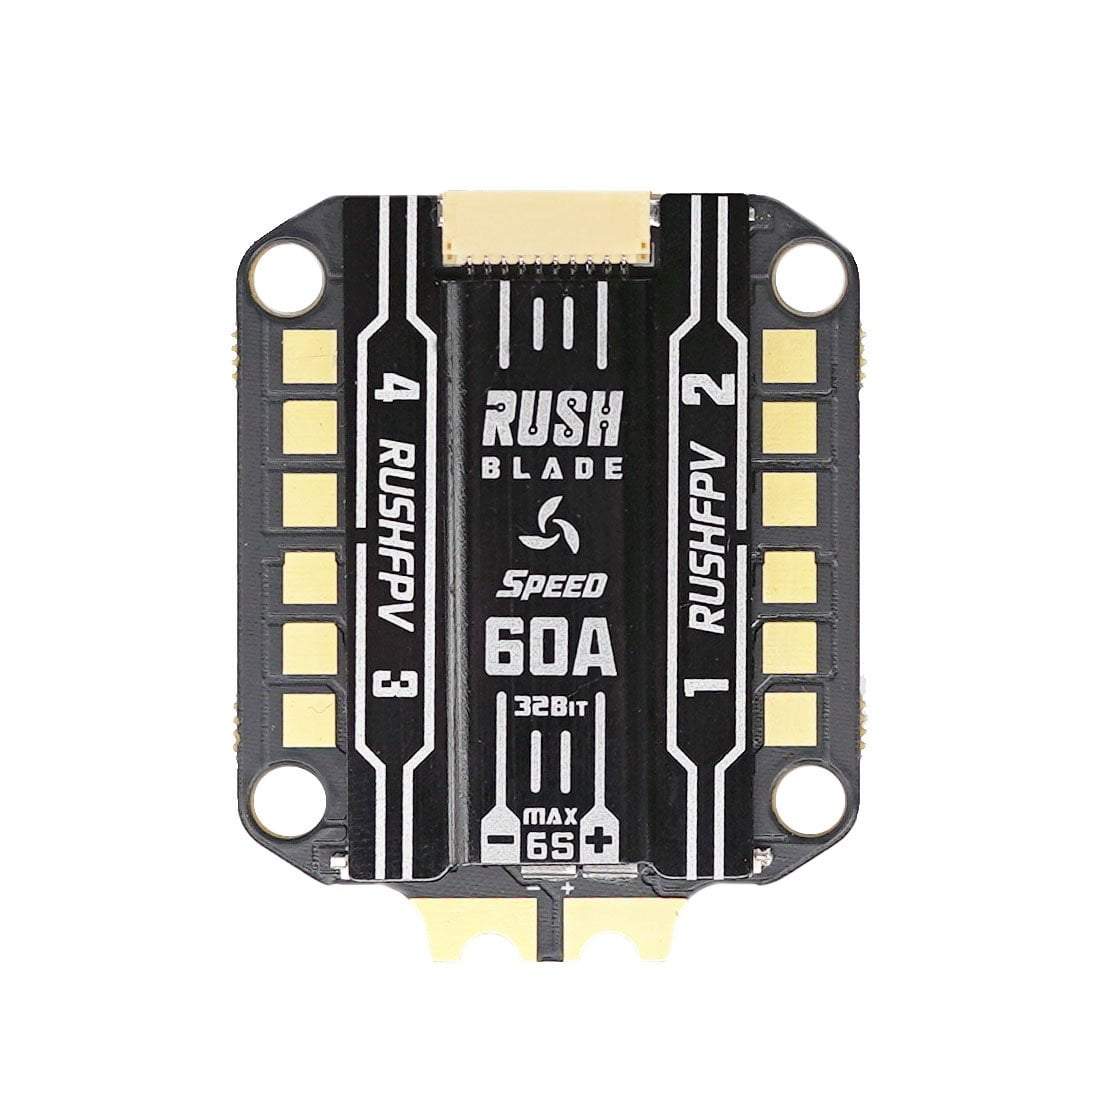 Rush Blade 60A 3-6S BLHeli_32 30x30 4in1 ESC Speed Edition